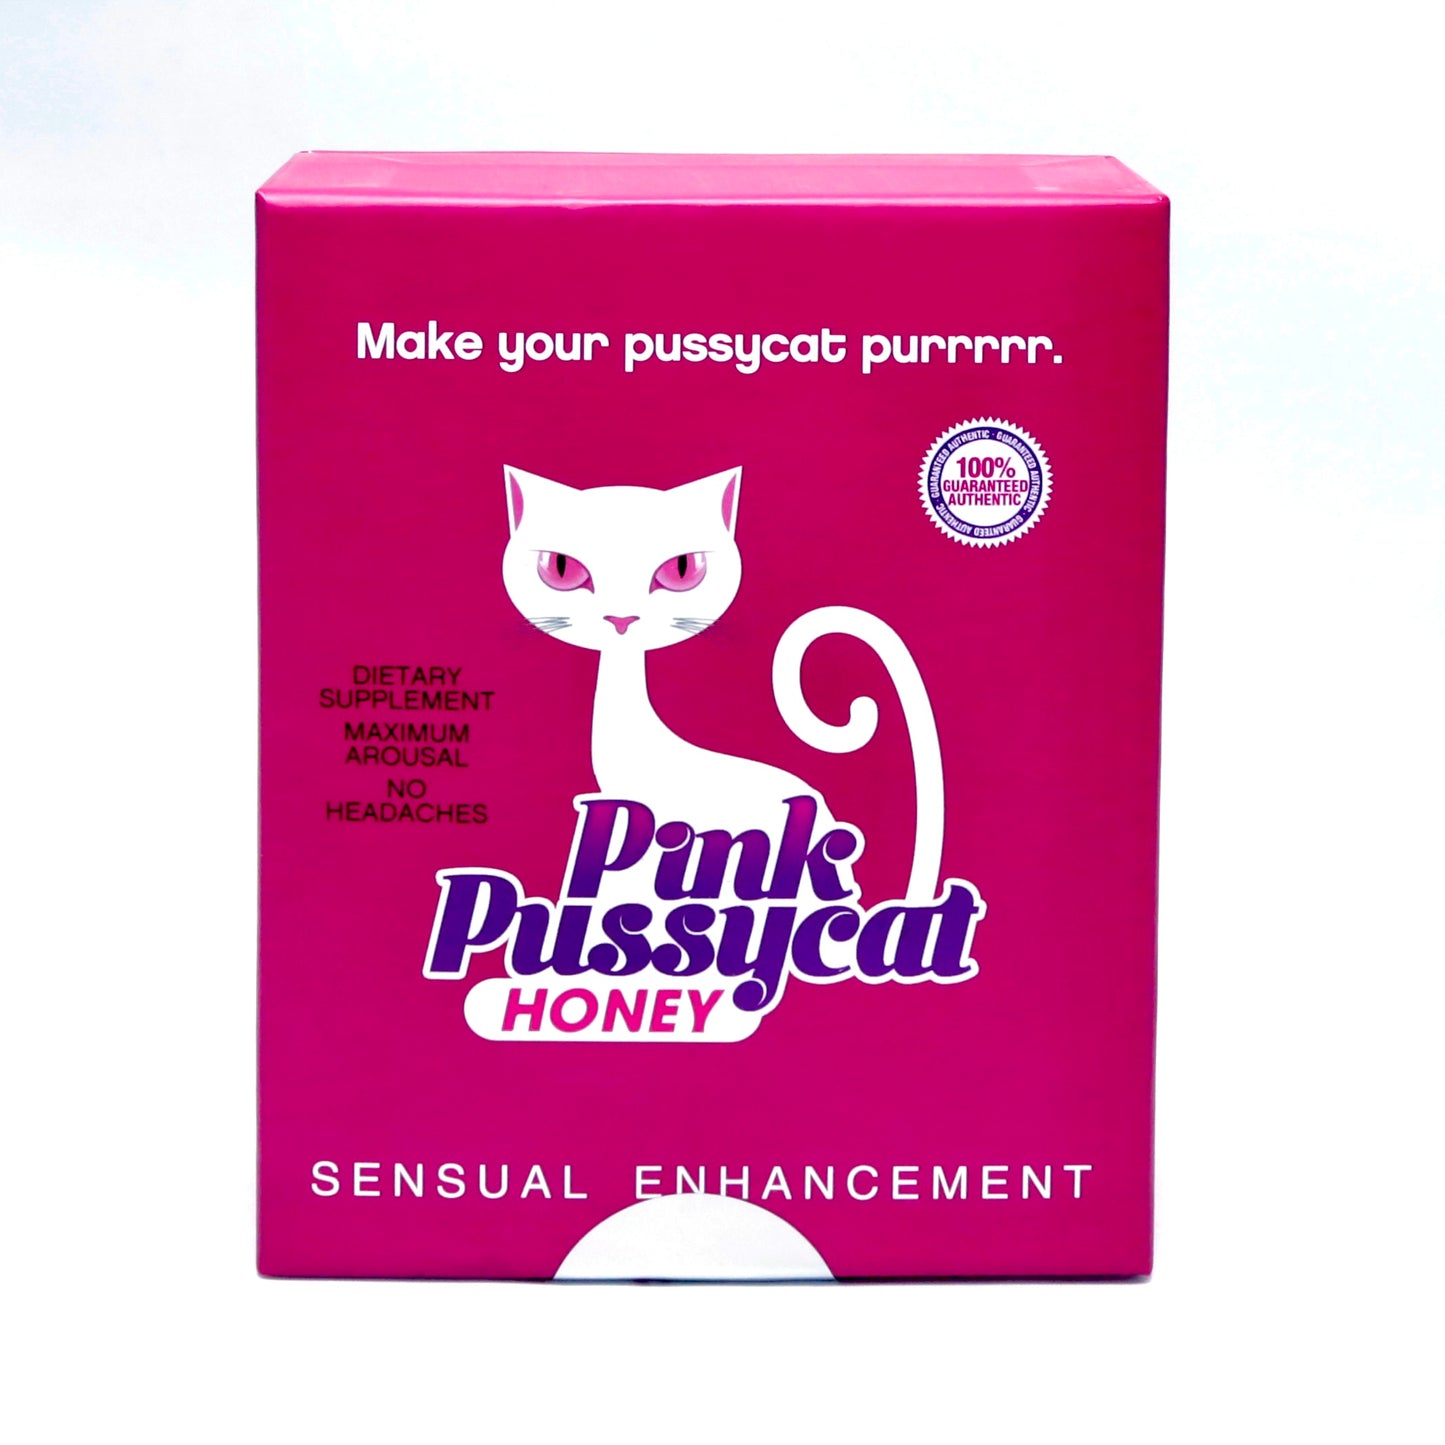 Pink Pussy Cat Honey for Women